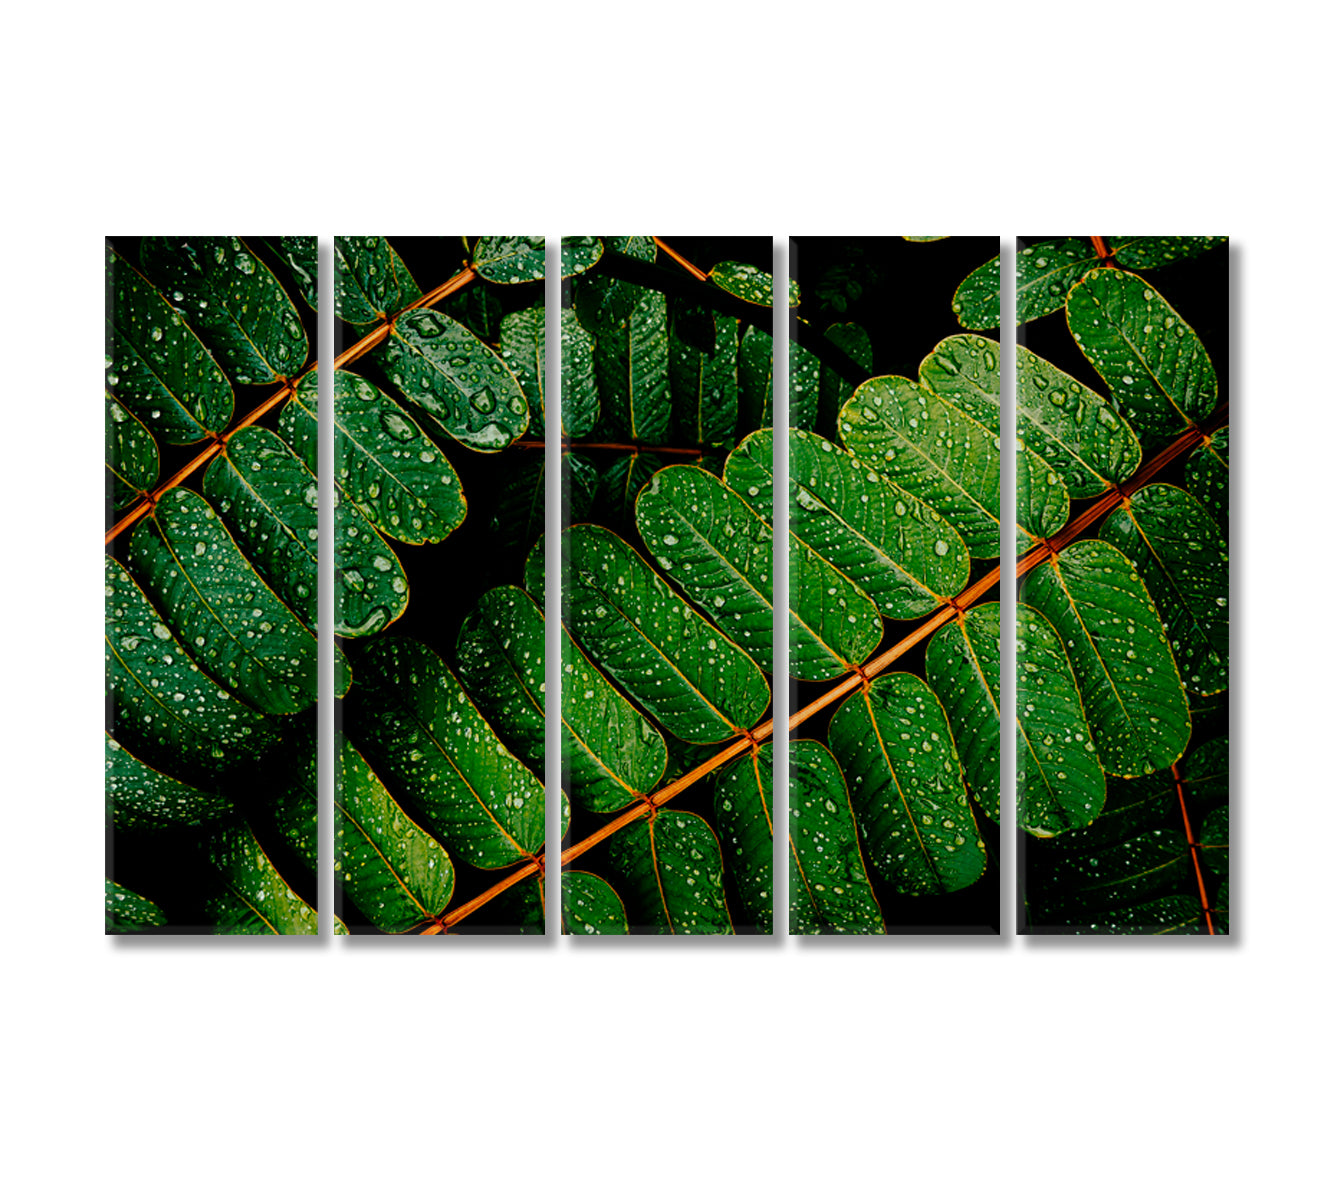 Green Leaves with Water Drops Canvas Print-Canvas Print-CetArt-5 Panels-36x24 inches-CetArt